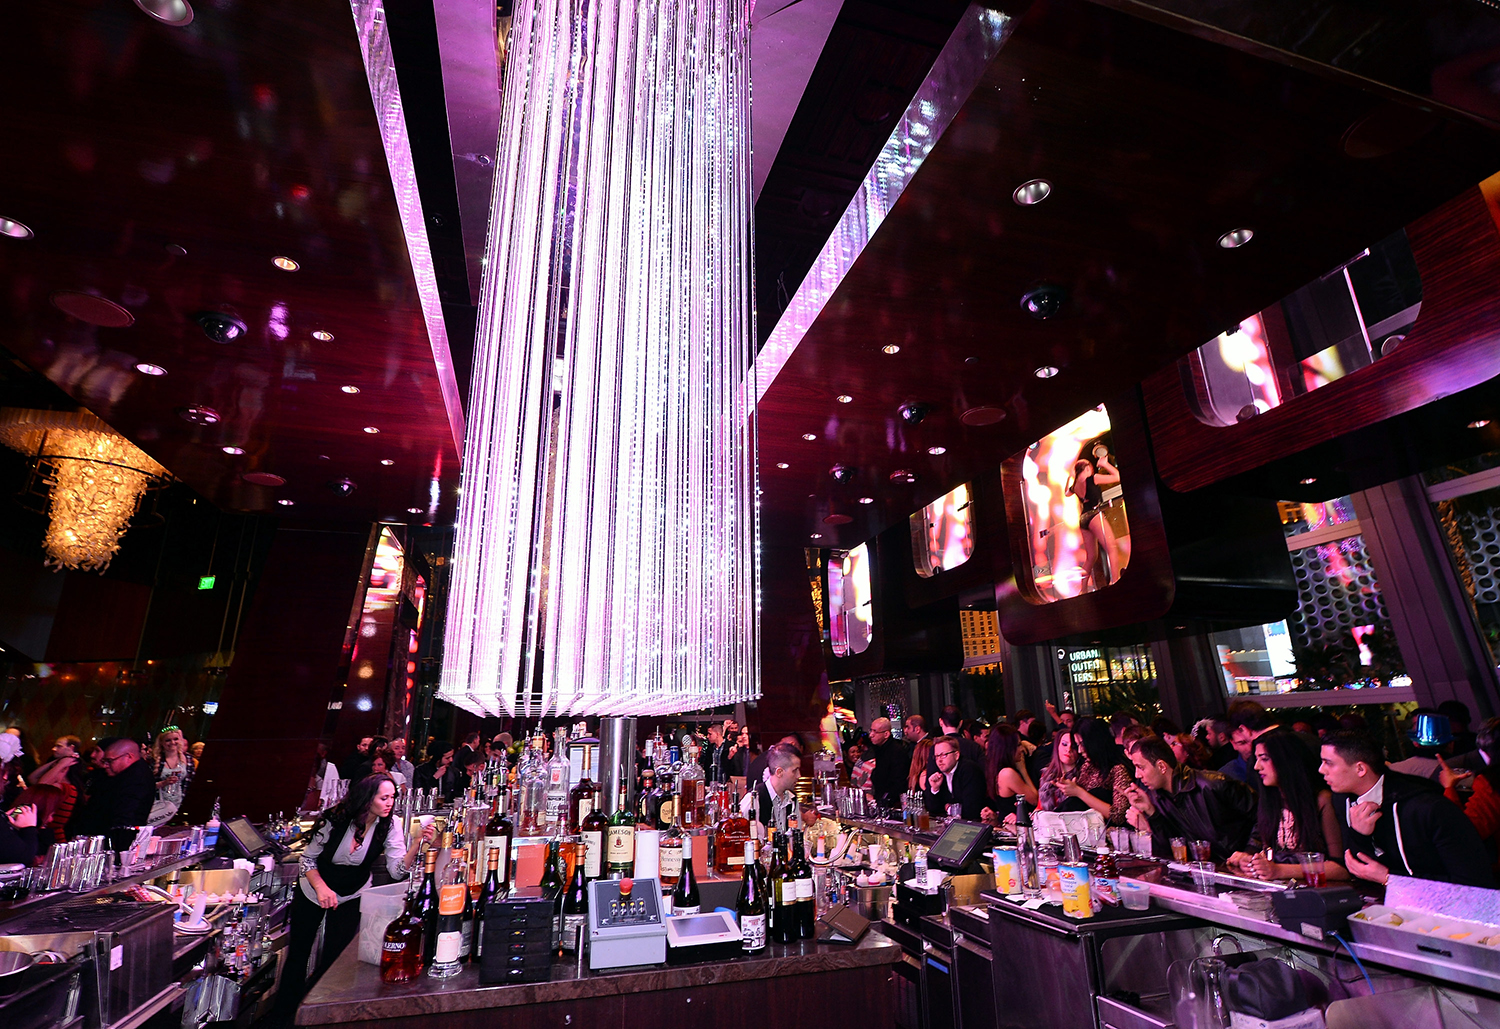 A general view during a New Year's Eve celebration at BOND inside The Cosmopolitan of Las Vegas on January 1, 2014 in Las Vegas, Nevada. (Ethan Miller/WireImage)